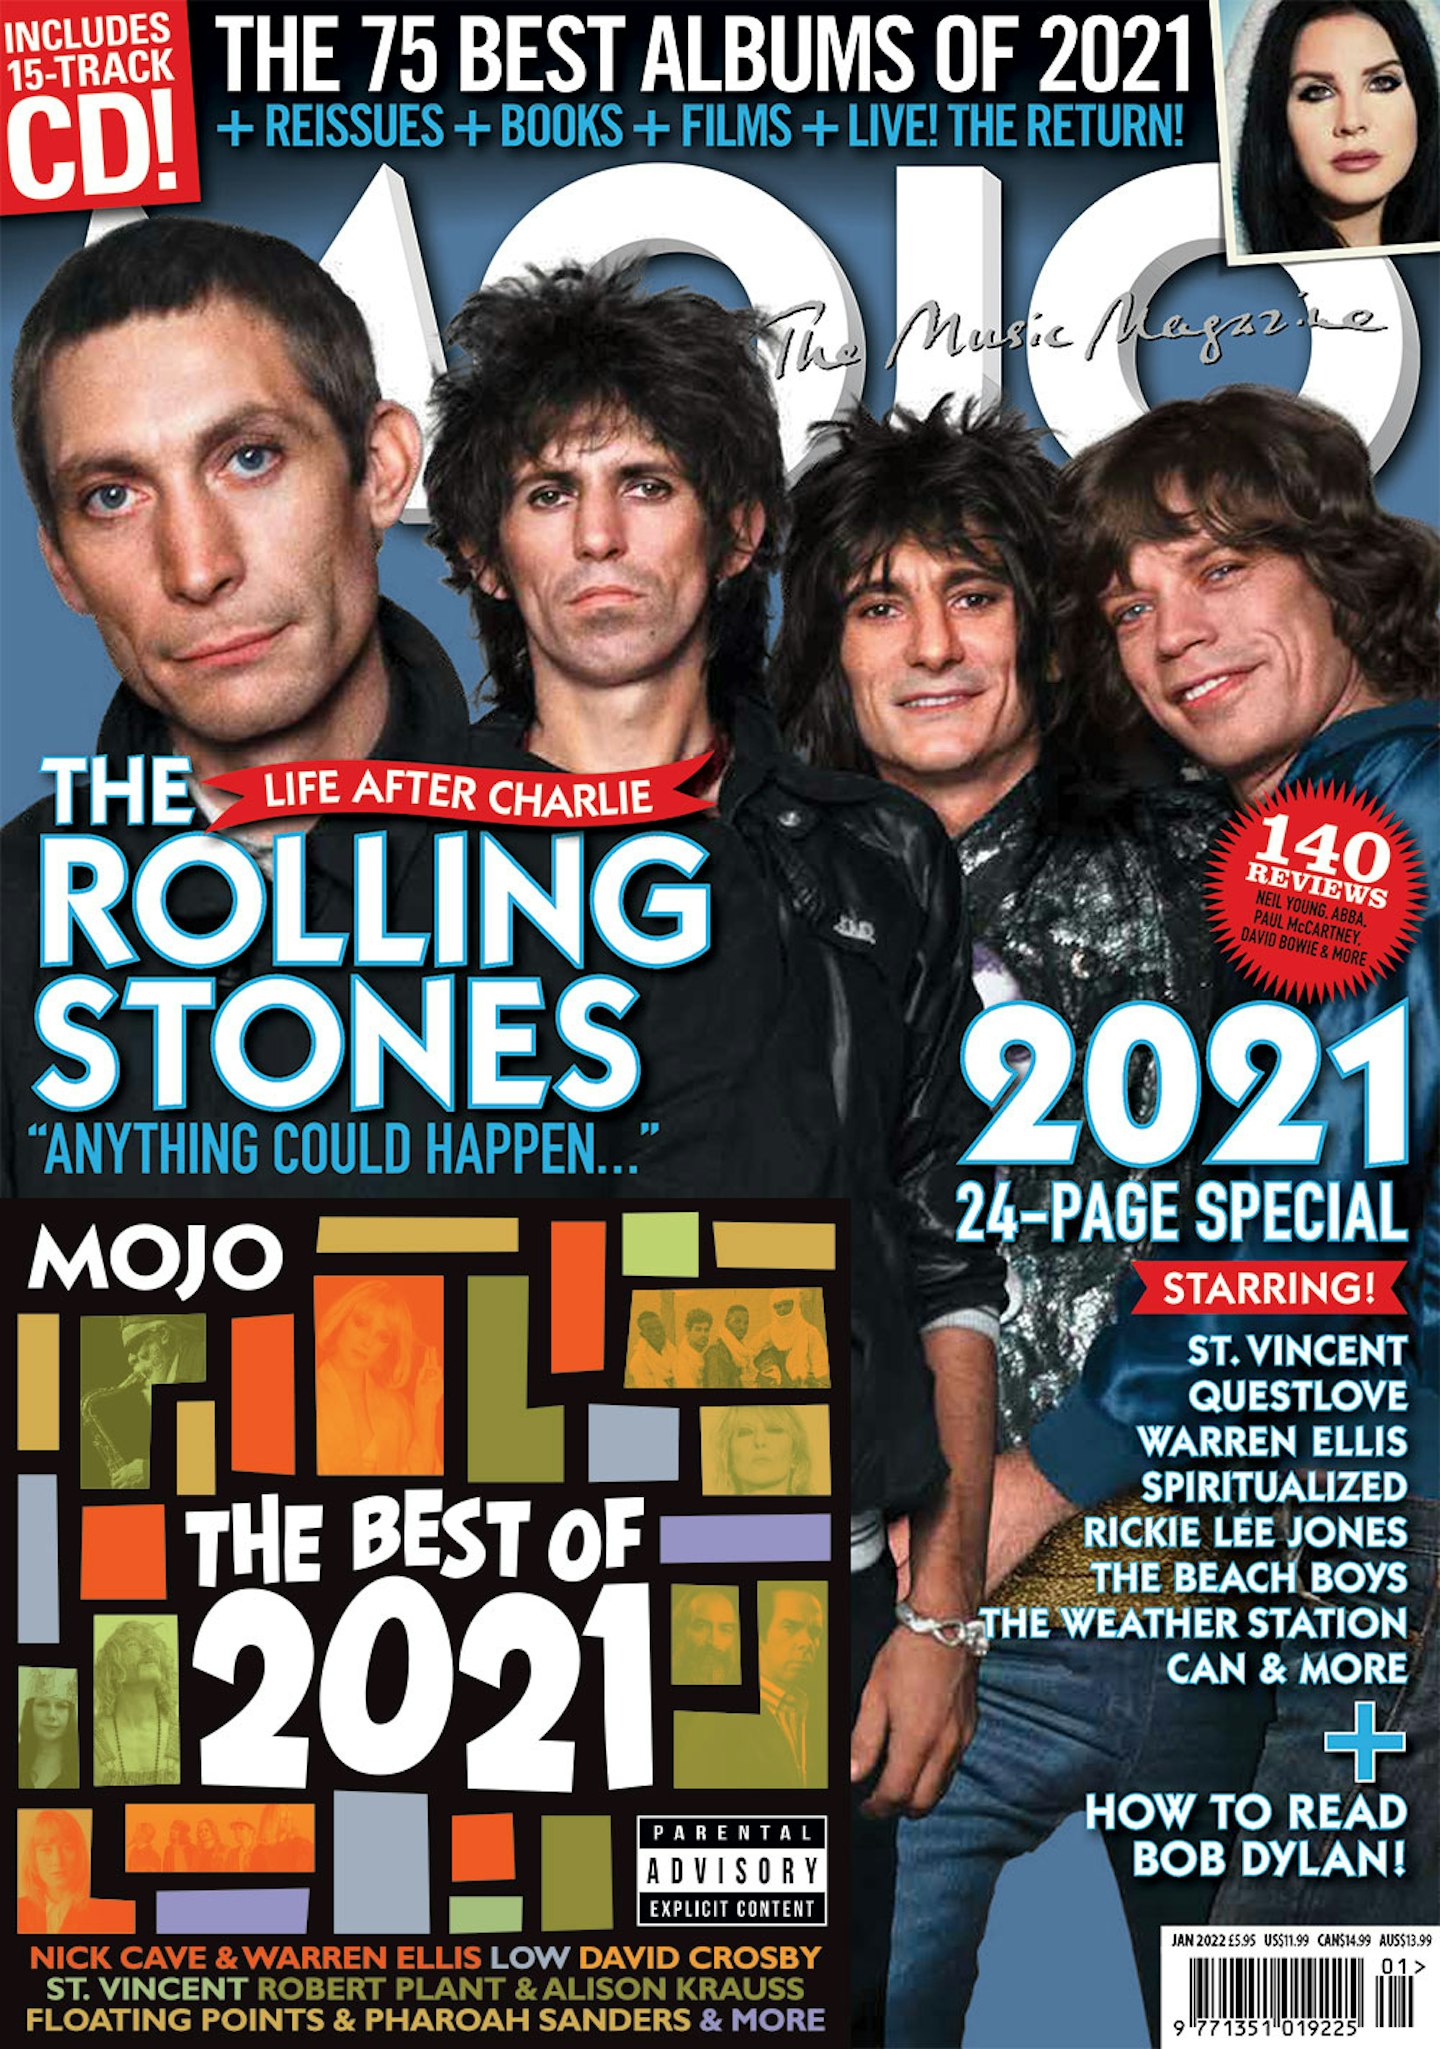 MOJO 338 cover, featuring The Rolling Stones